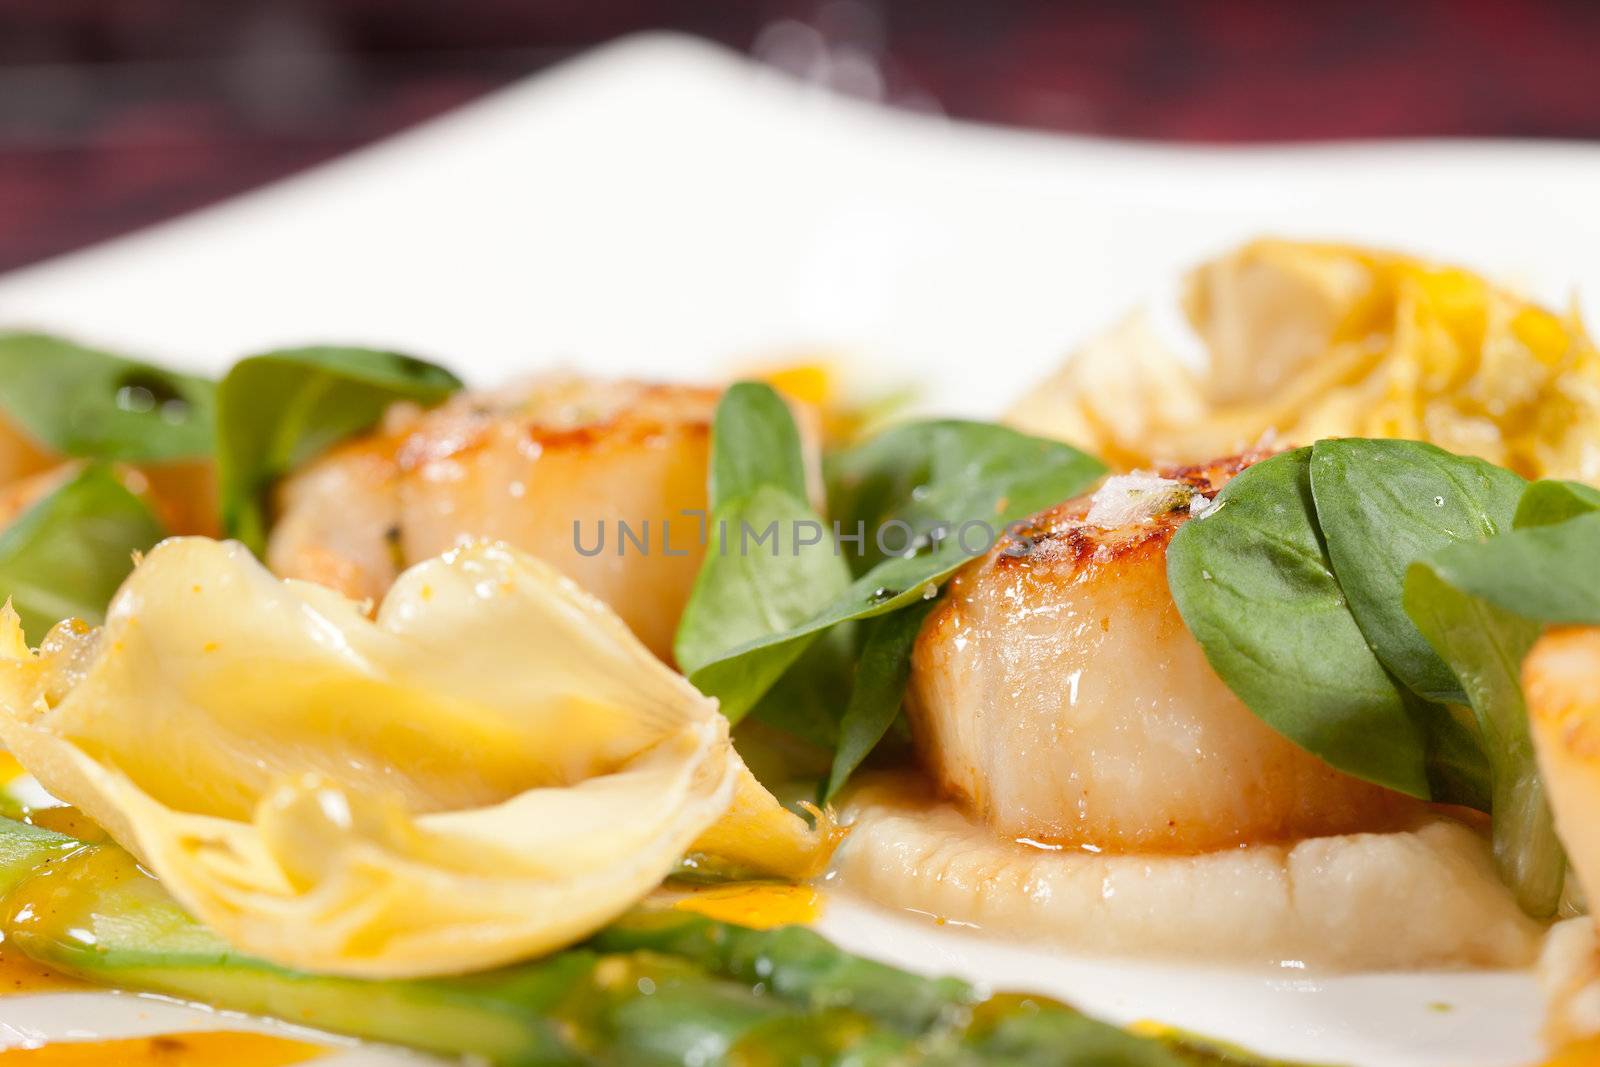 Baked scallops with asparagus by shebeko